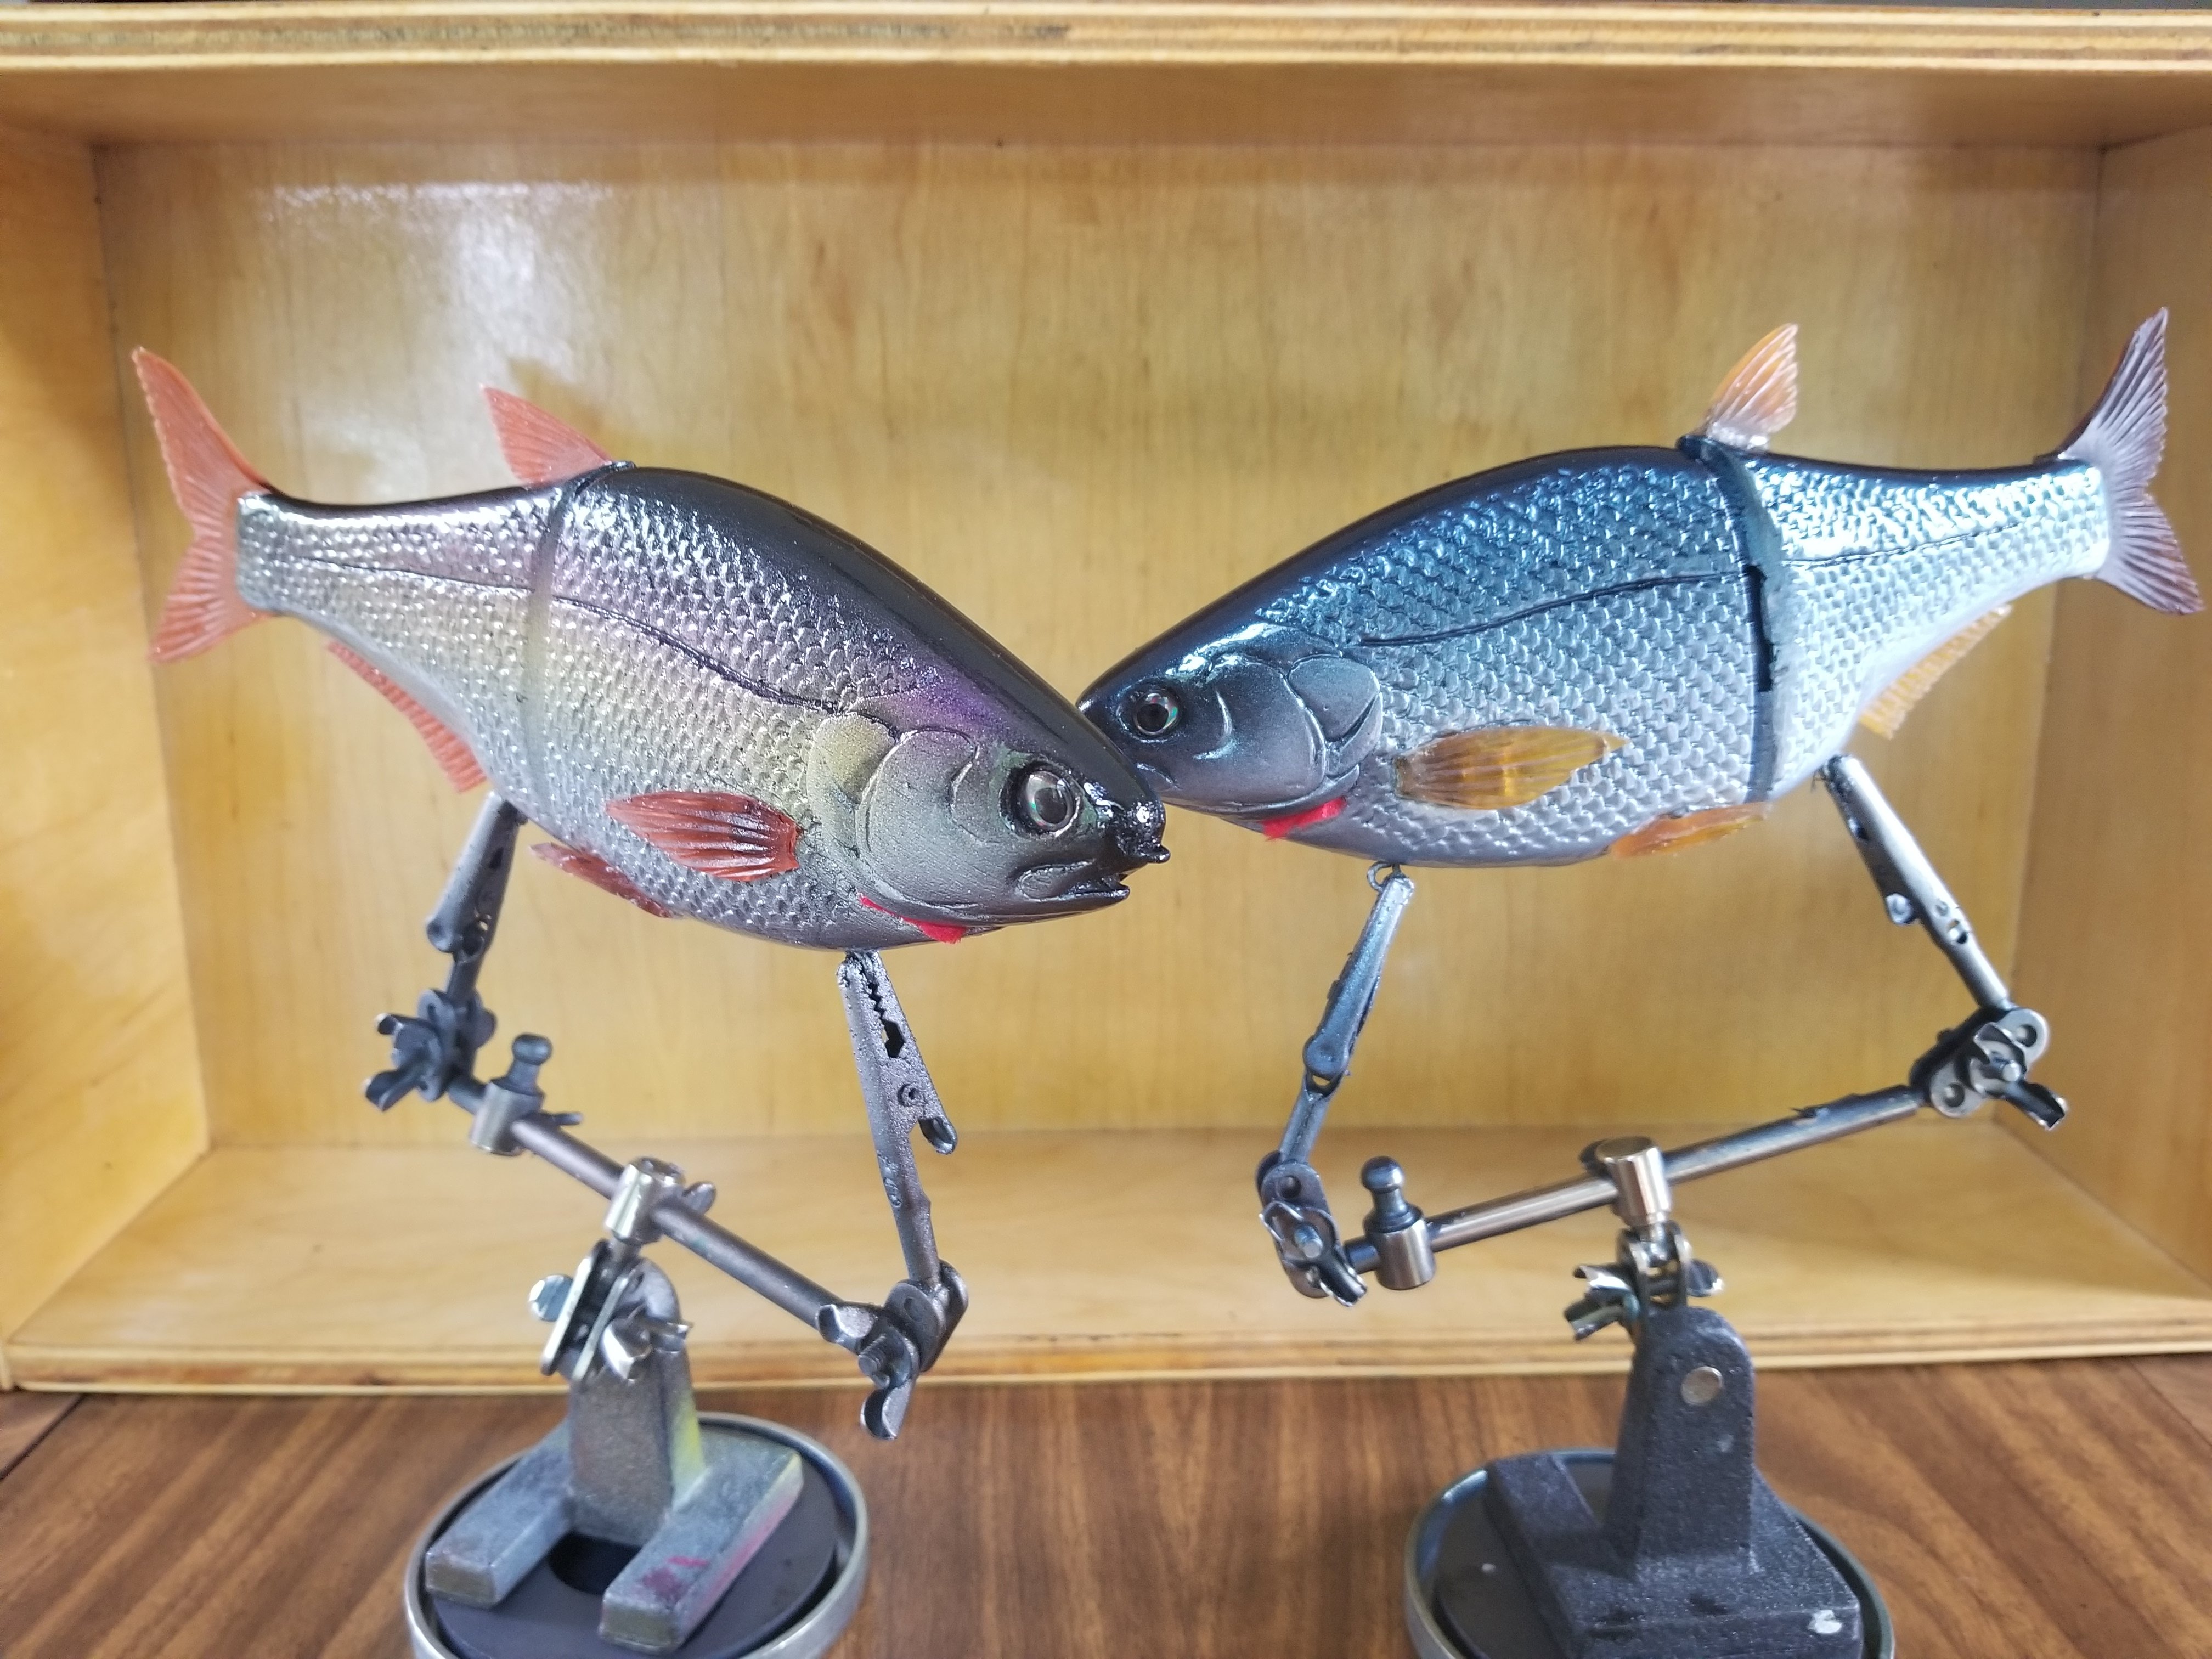 RAINBOW TROUT - 11~ HINKLE TROUT CLONE K.O SWIMBAIT CUSTOM - SHAD KGB 3:16  abroad prompt decision : Real Yahoo auction salling